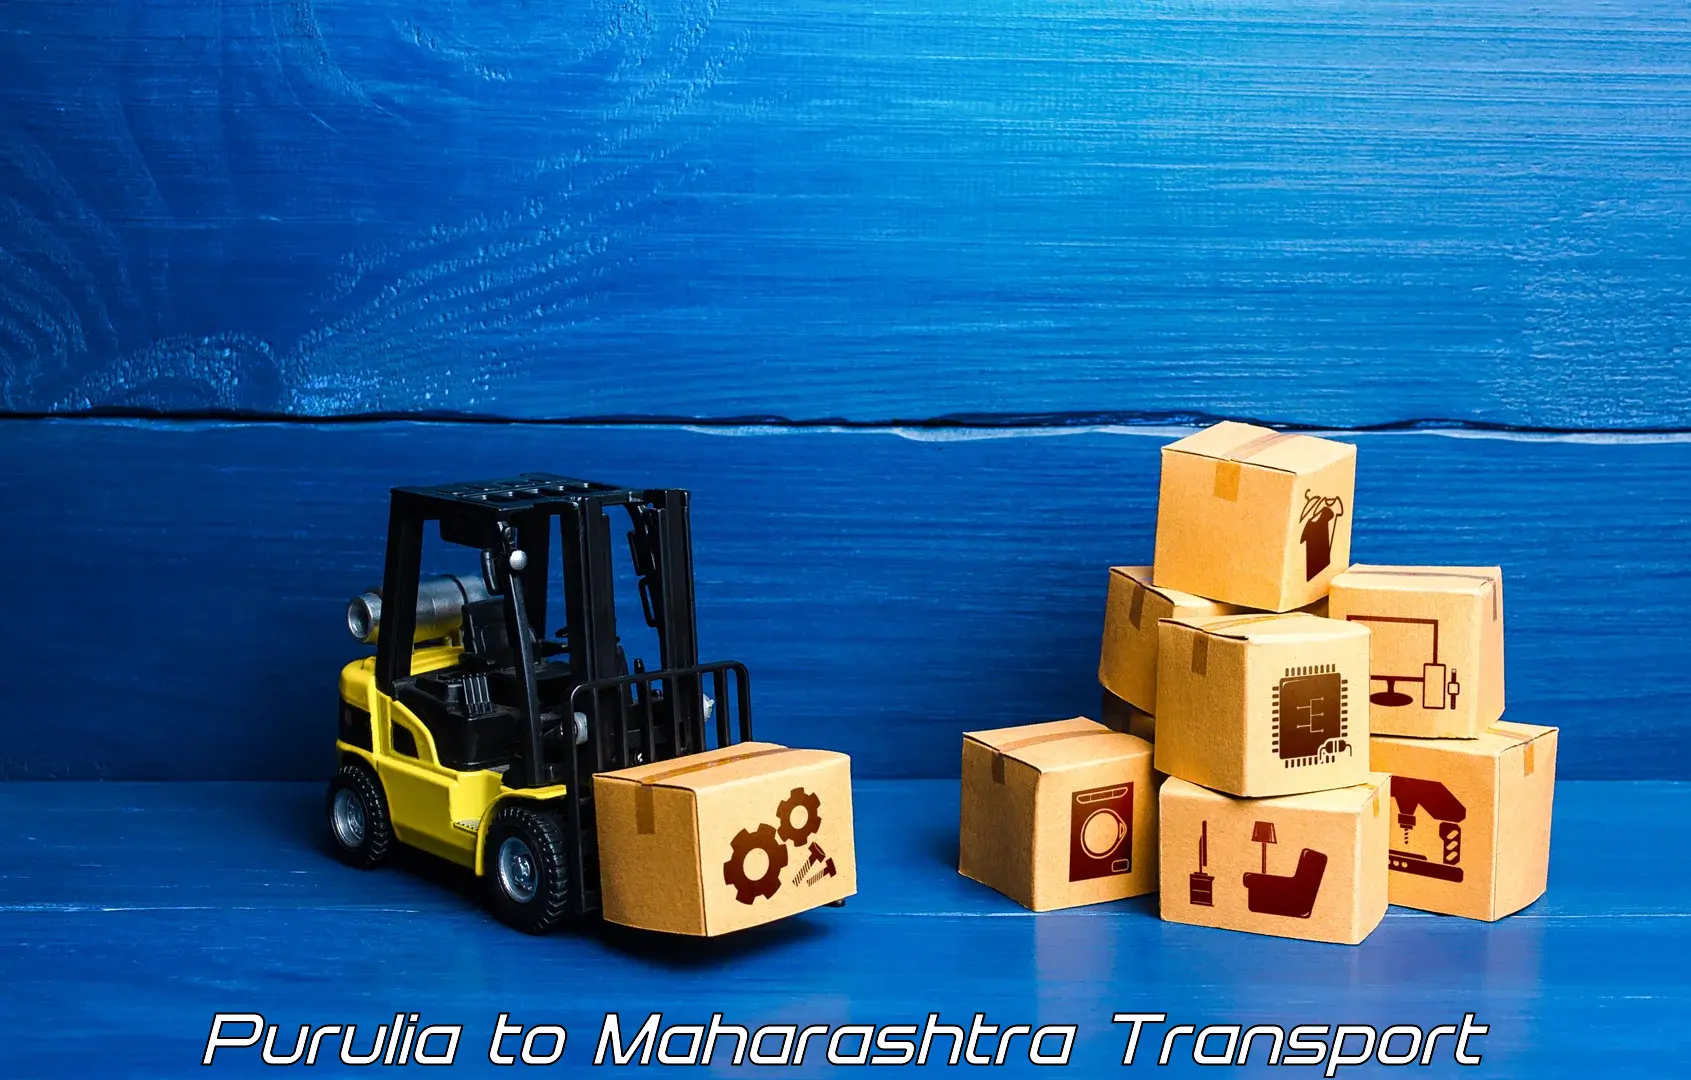 Transportation solution services Purulia to Hinganghat